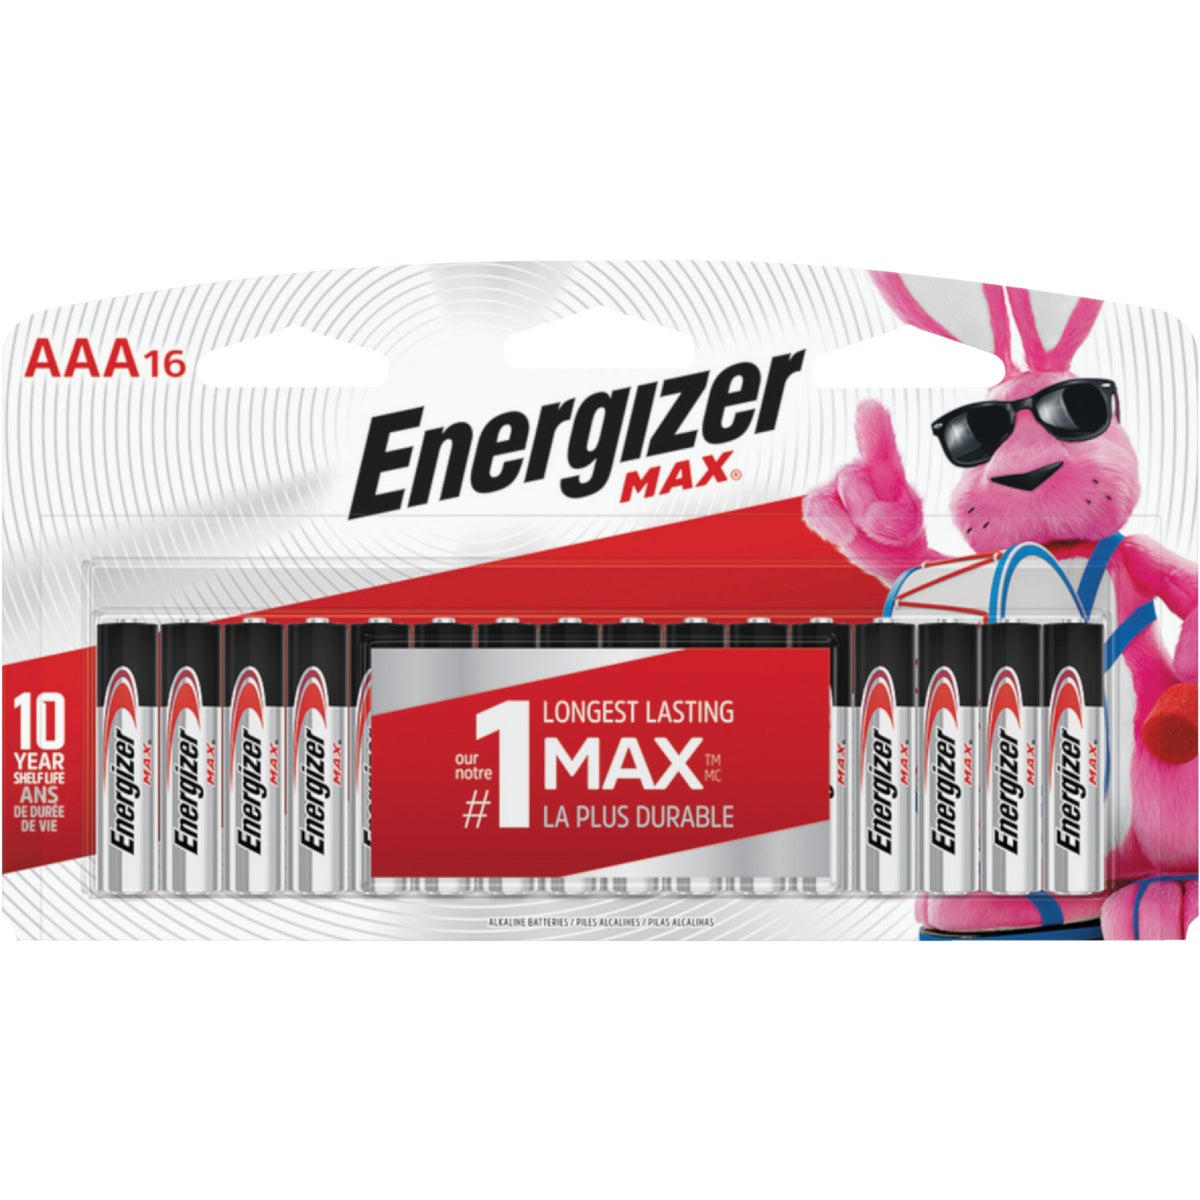 Energizer Max AAA Alkaline Battery (16-Pack)